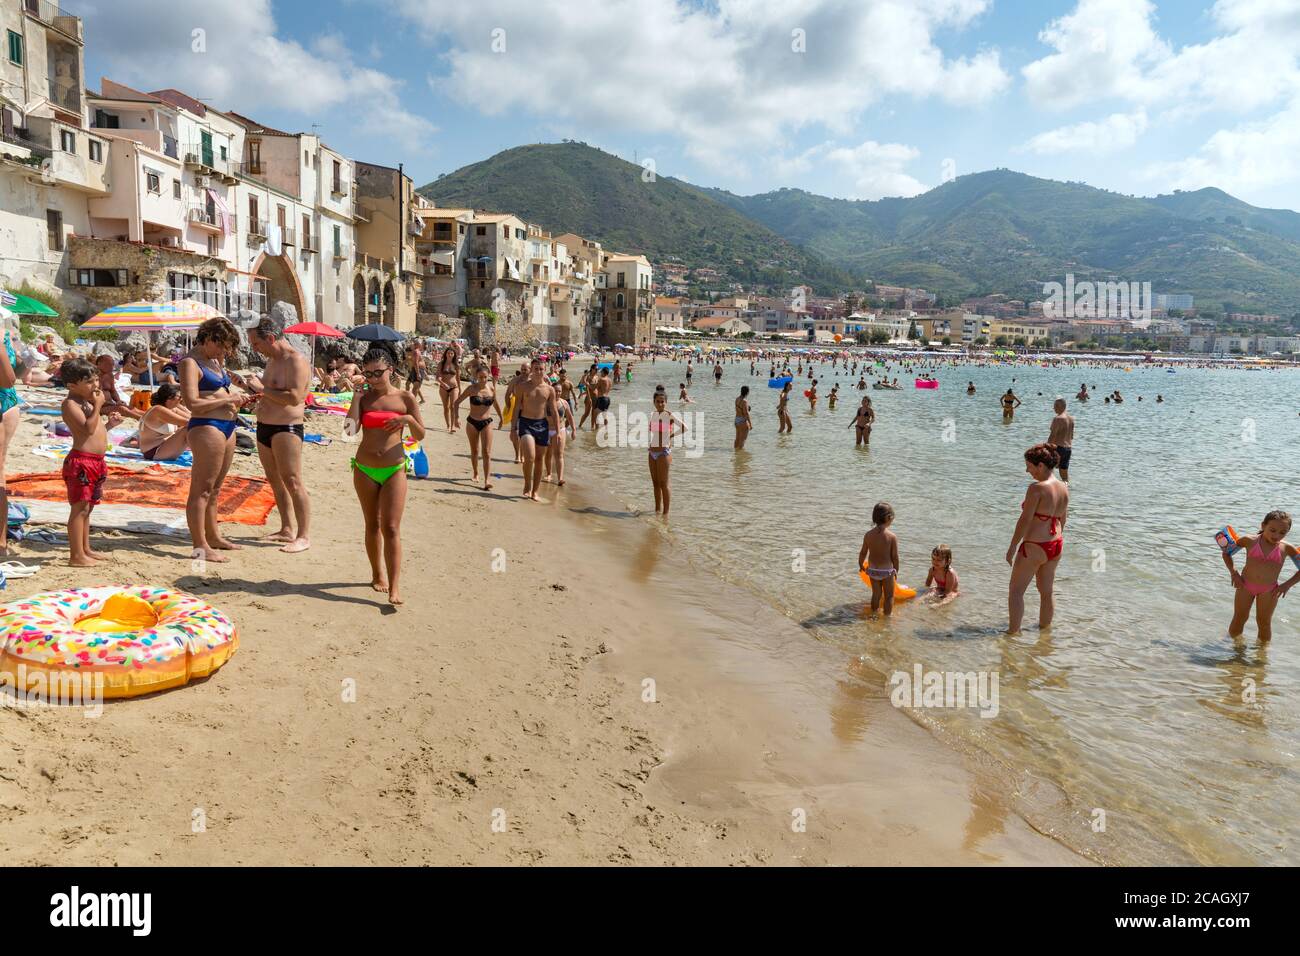 11.08.2018, Cefalu, Sicily, Italy - Tourists and locals relax on the city beach under umbrellas and swim in the Mediterranean Sea. In the background t Stock Photo